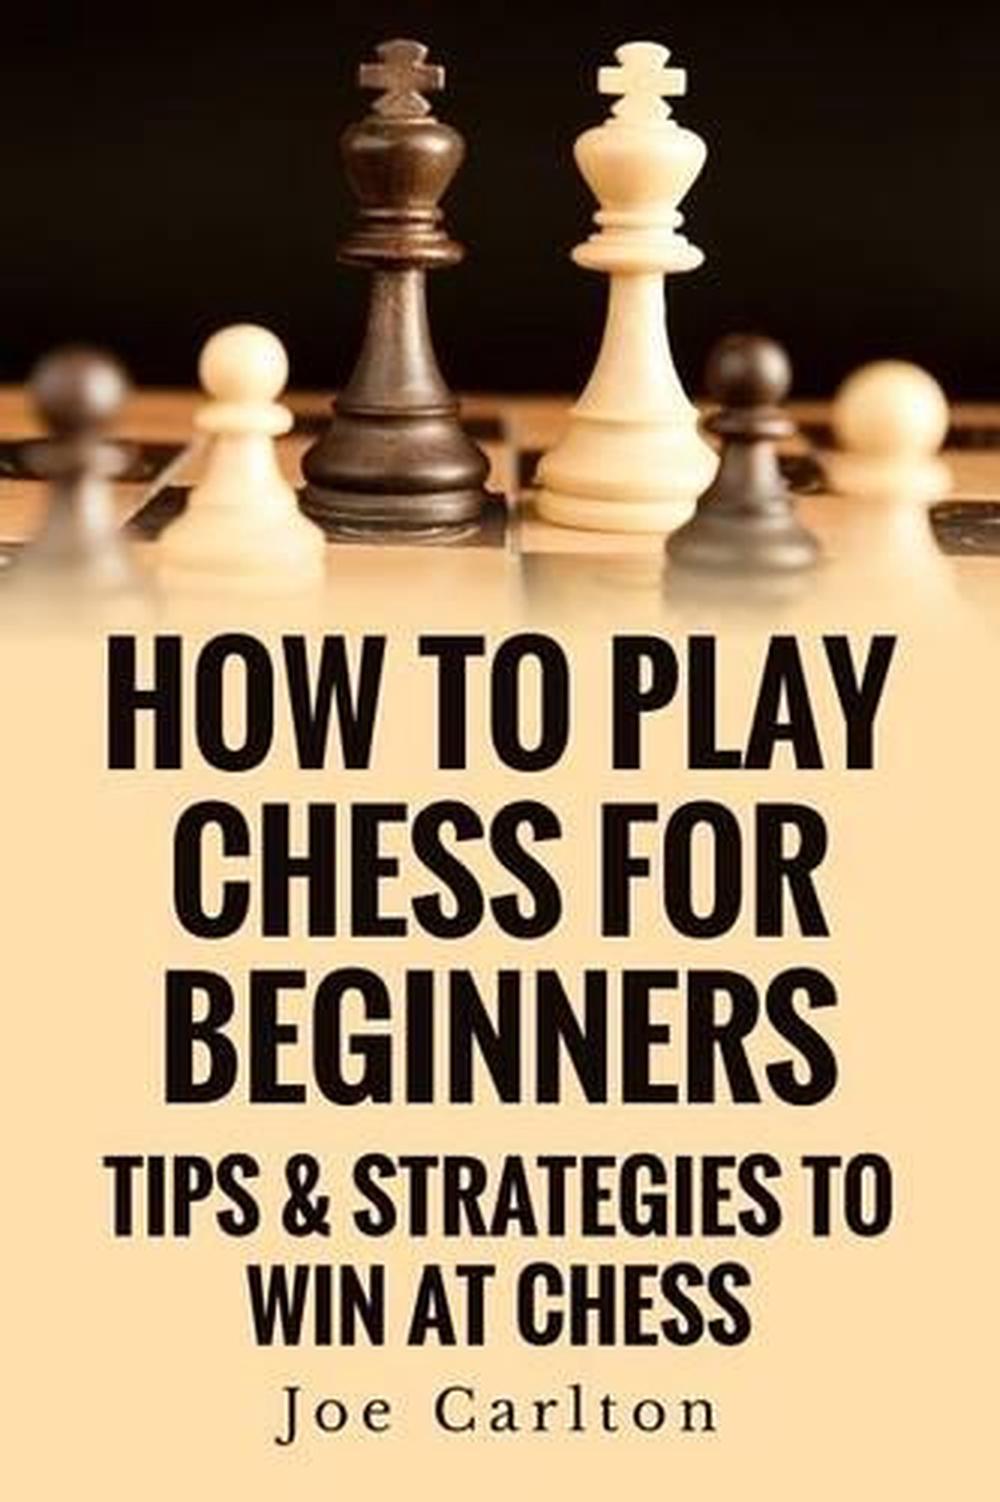 gay online chess site for beginners